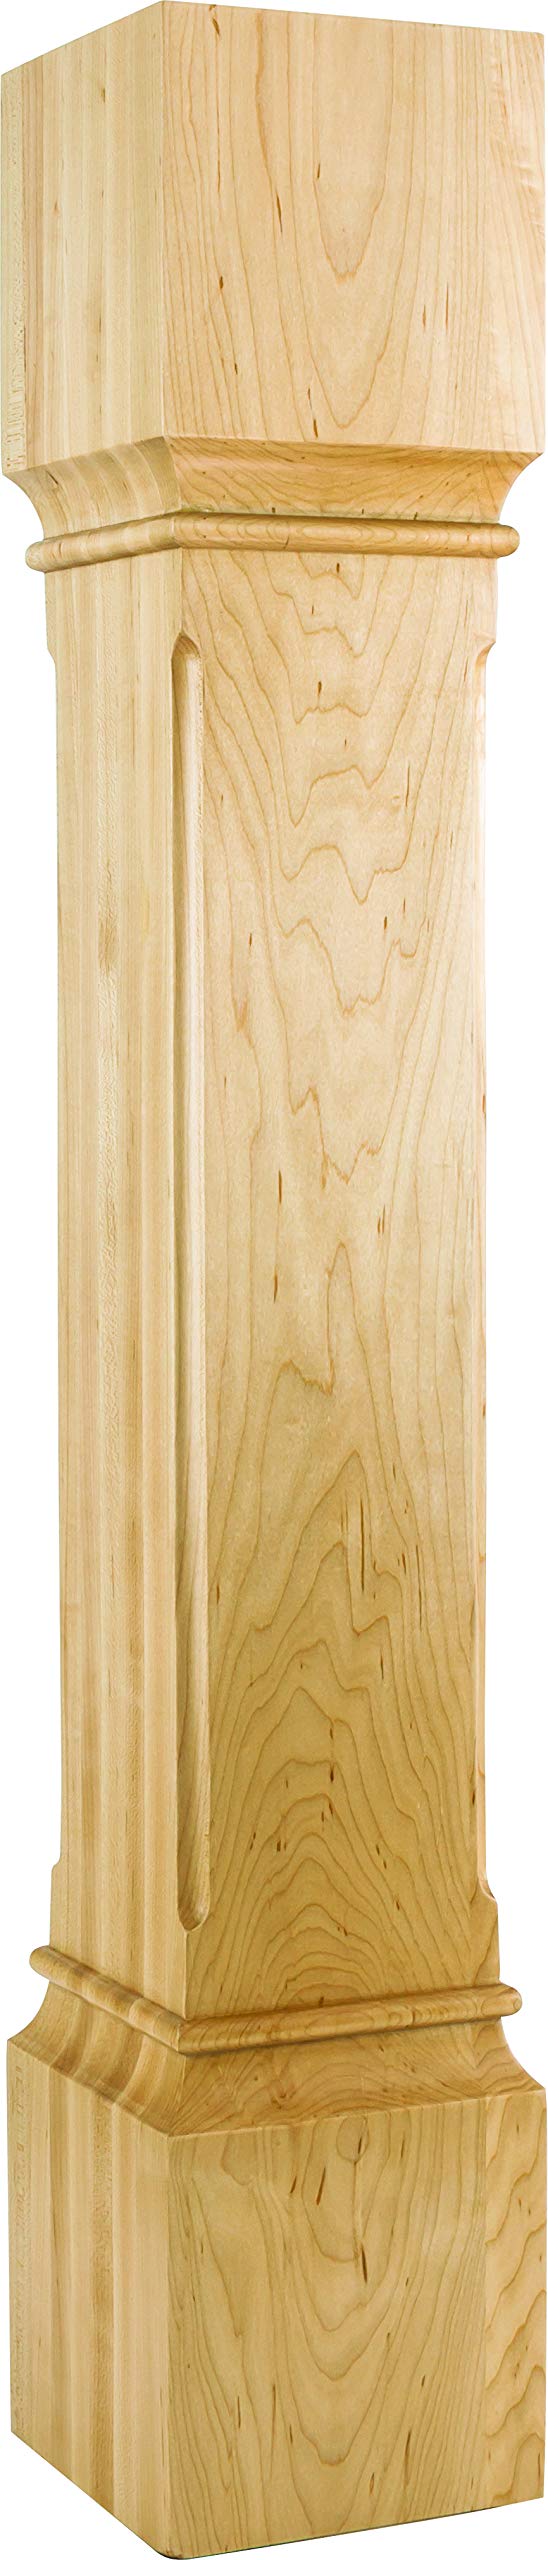 Hardware Resources P38-6-WB 6" W x 6" D x 35-1/2" H White Birch Fluted Edge Post